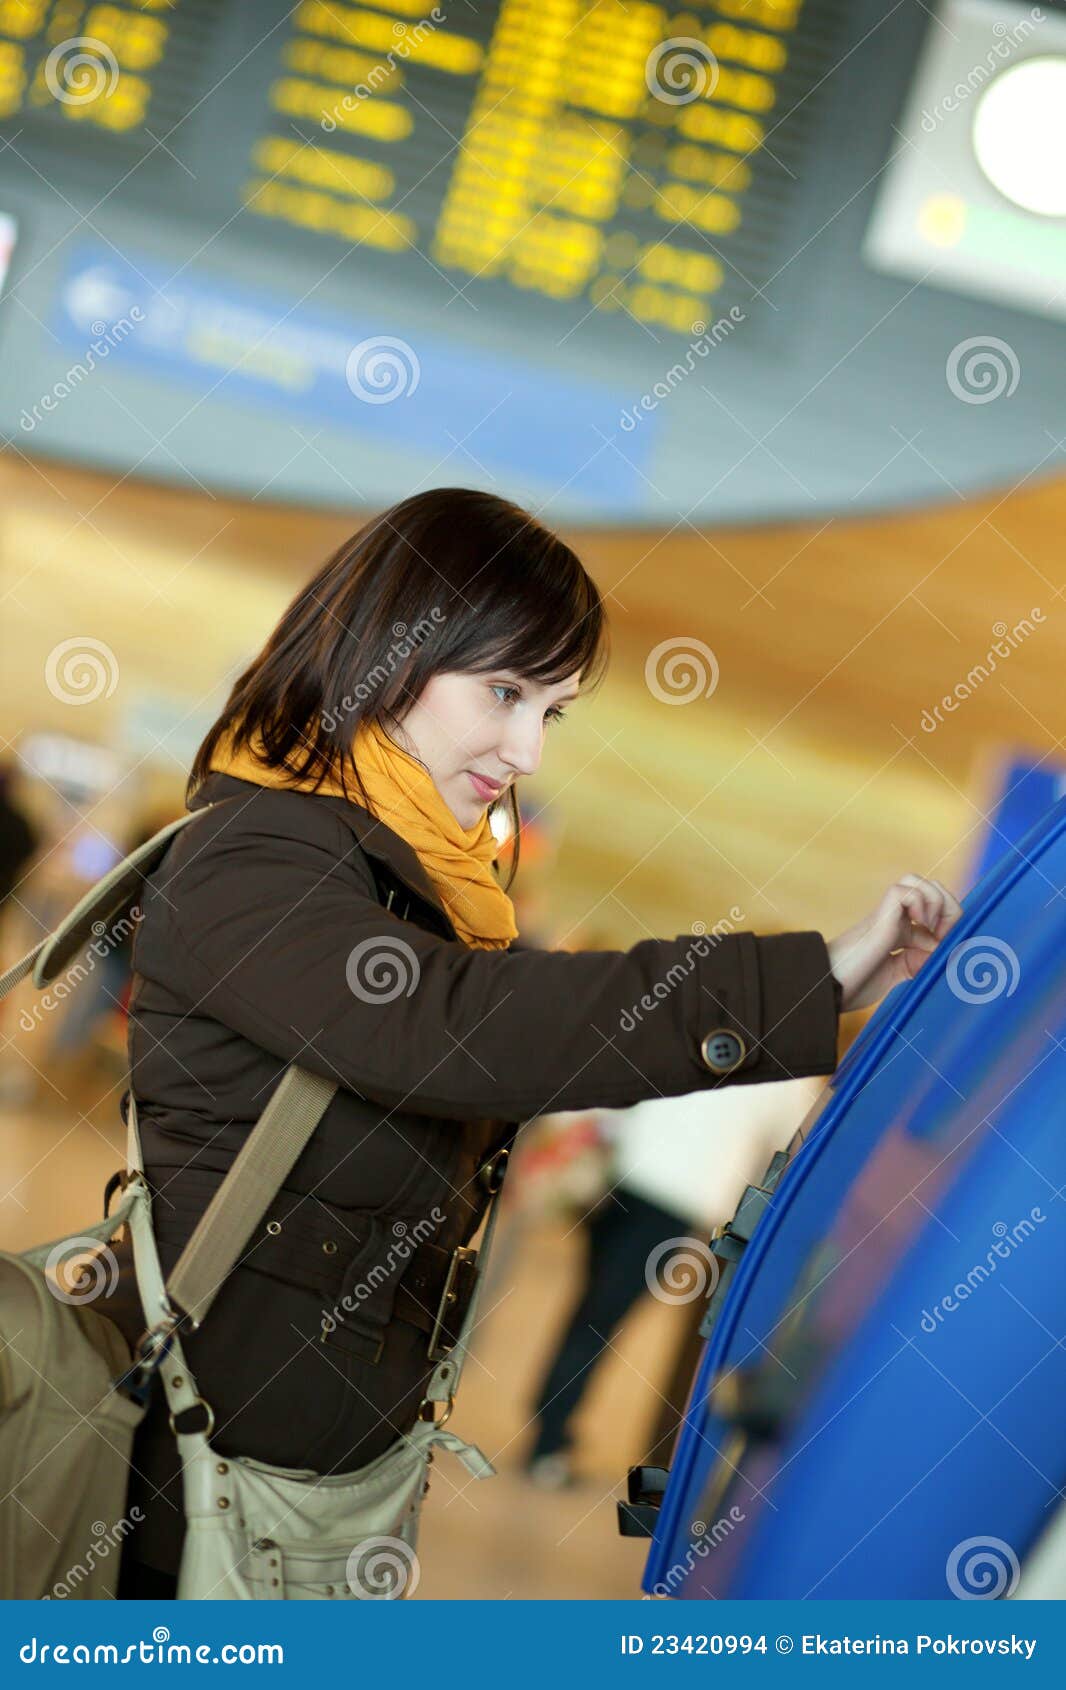 girl doing self-checkin in the airport